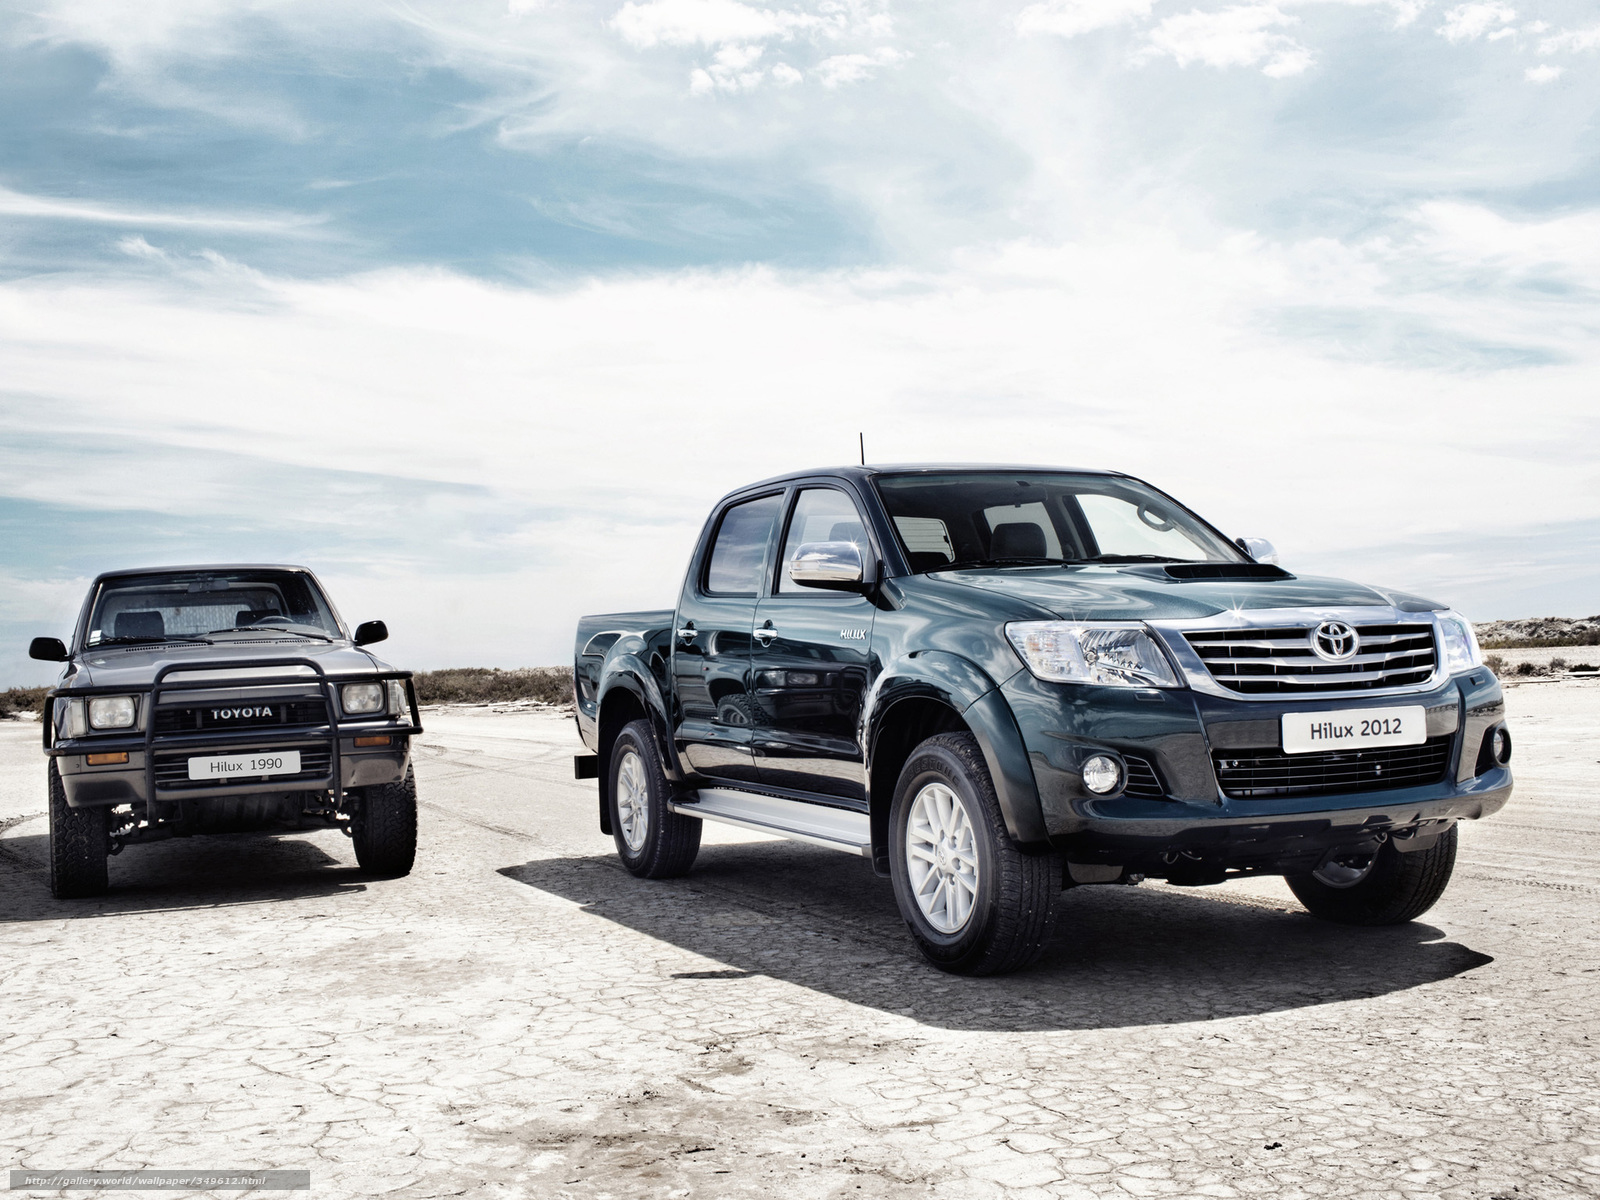 Download wallpaper Toyota Hilux pickup old and new free